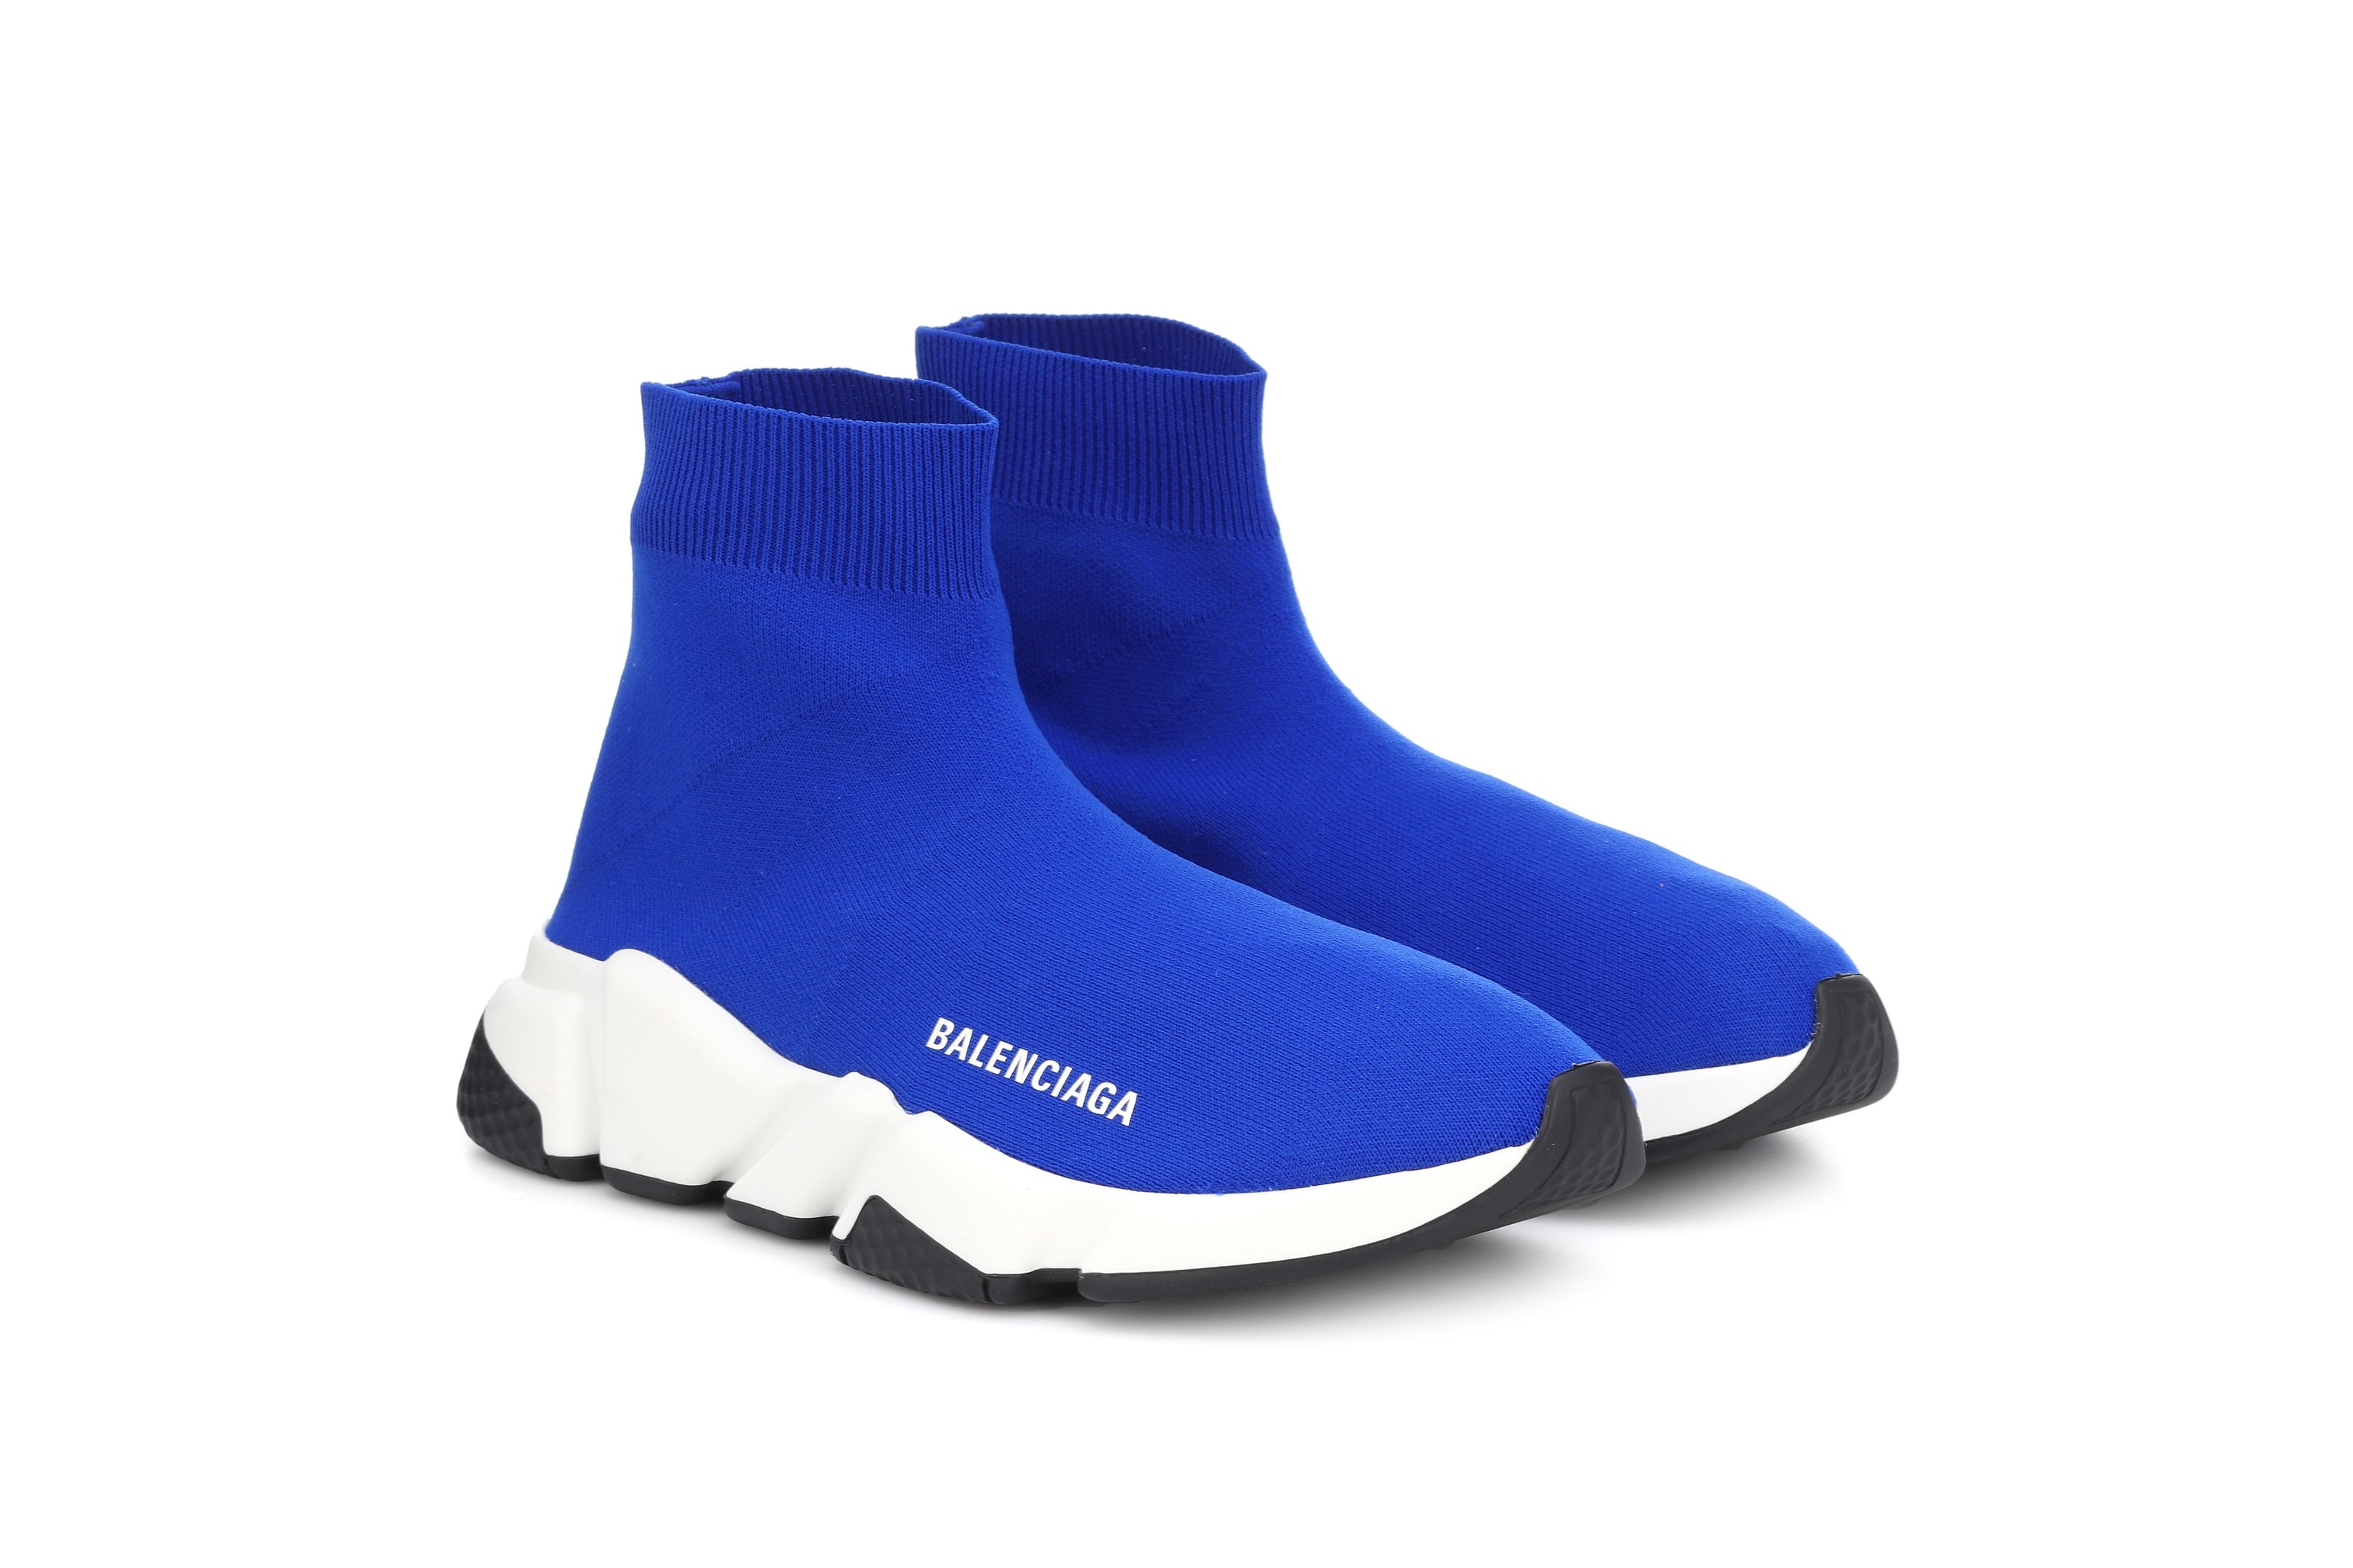 Balenciaga Speed Trailers in "Electric Blue" Sock Sneakers Runners Shoes